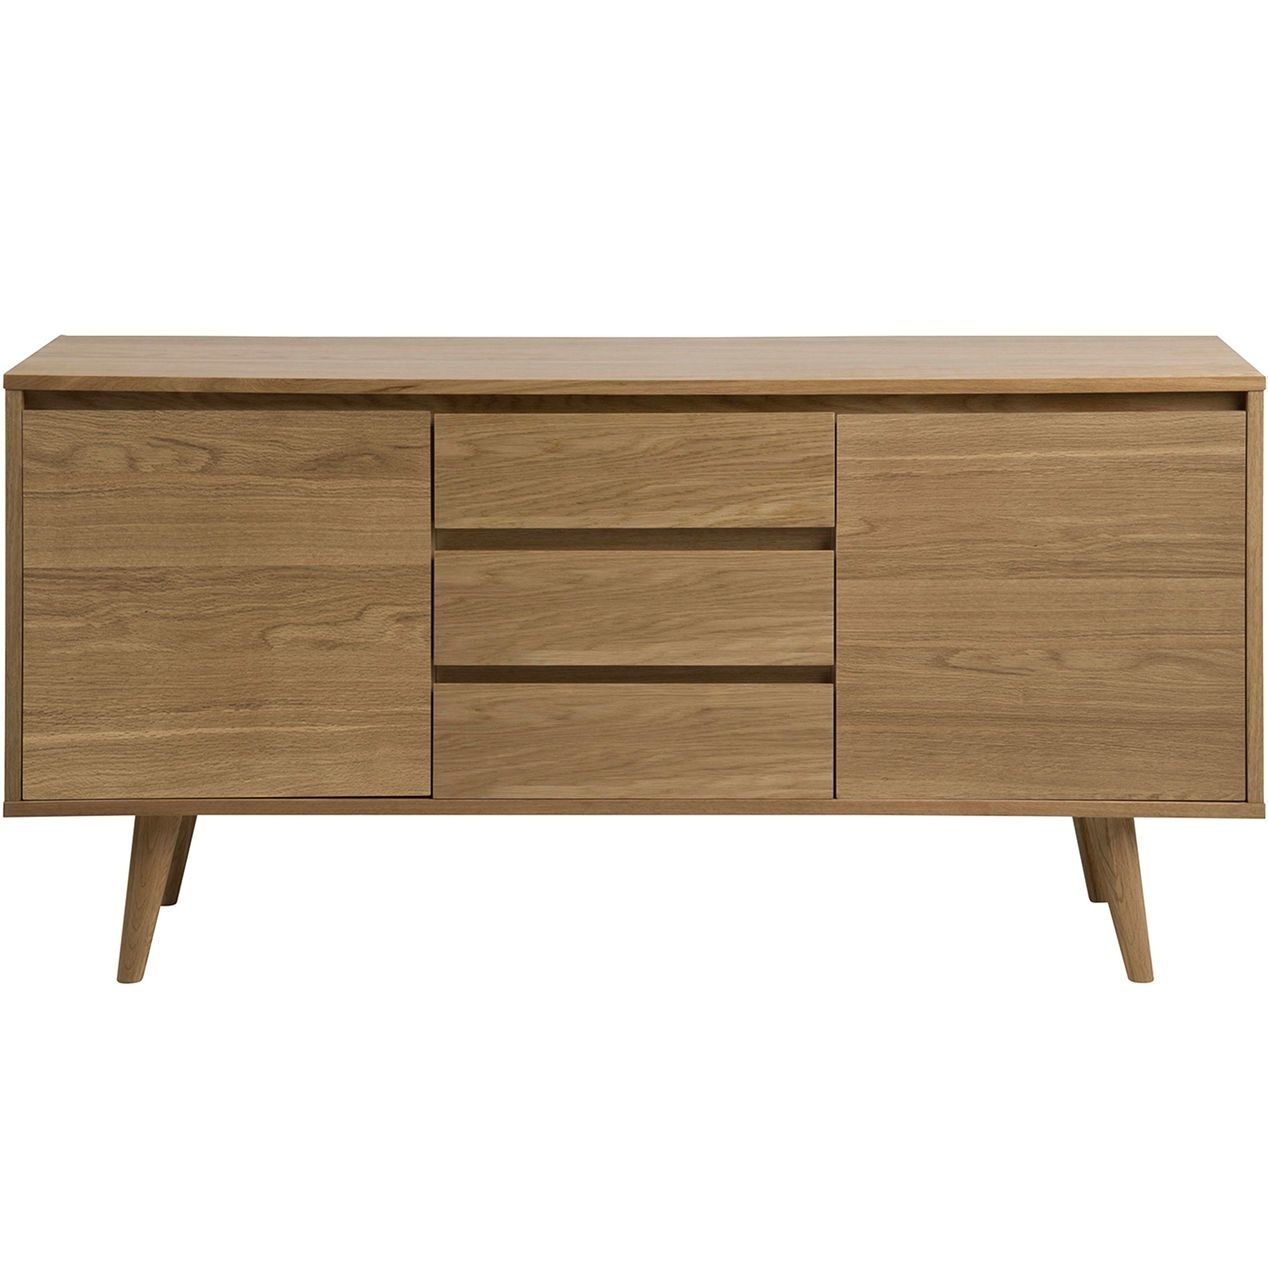 Nagano Sideboard Solid Oak Chest | Dining Room | Pinterest | Solid Within Most Up To Date Lockwood Sideboards (View 12 of 20)